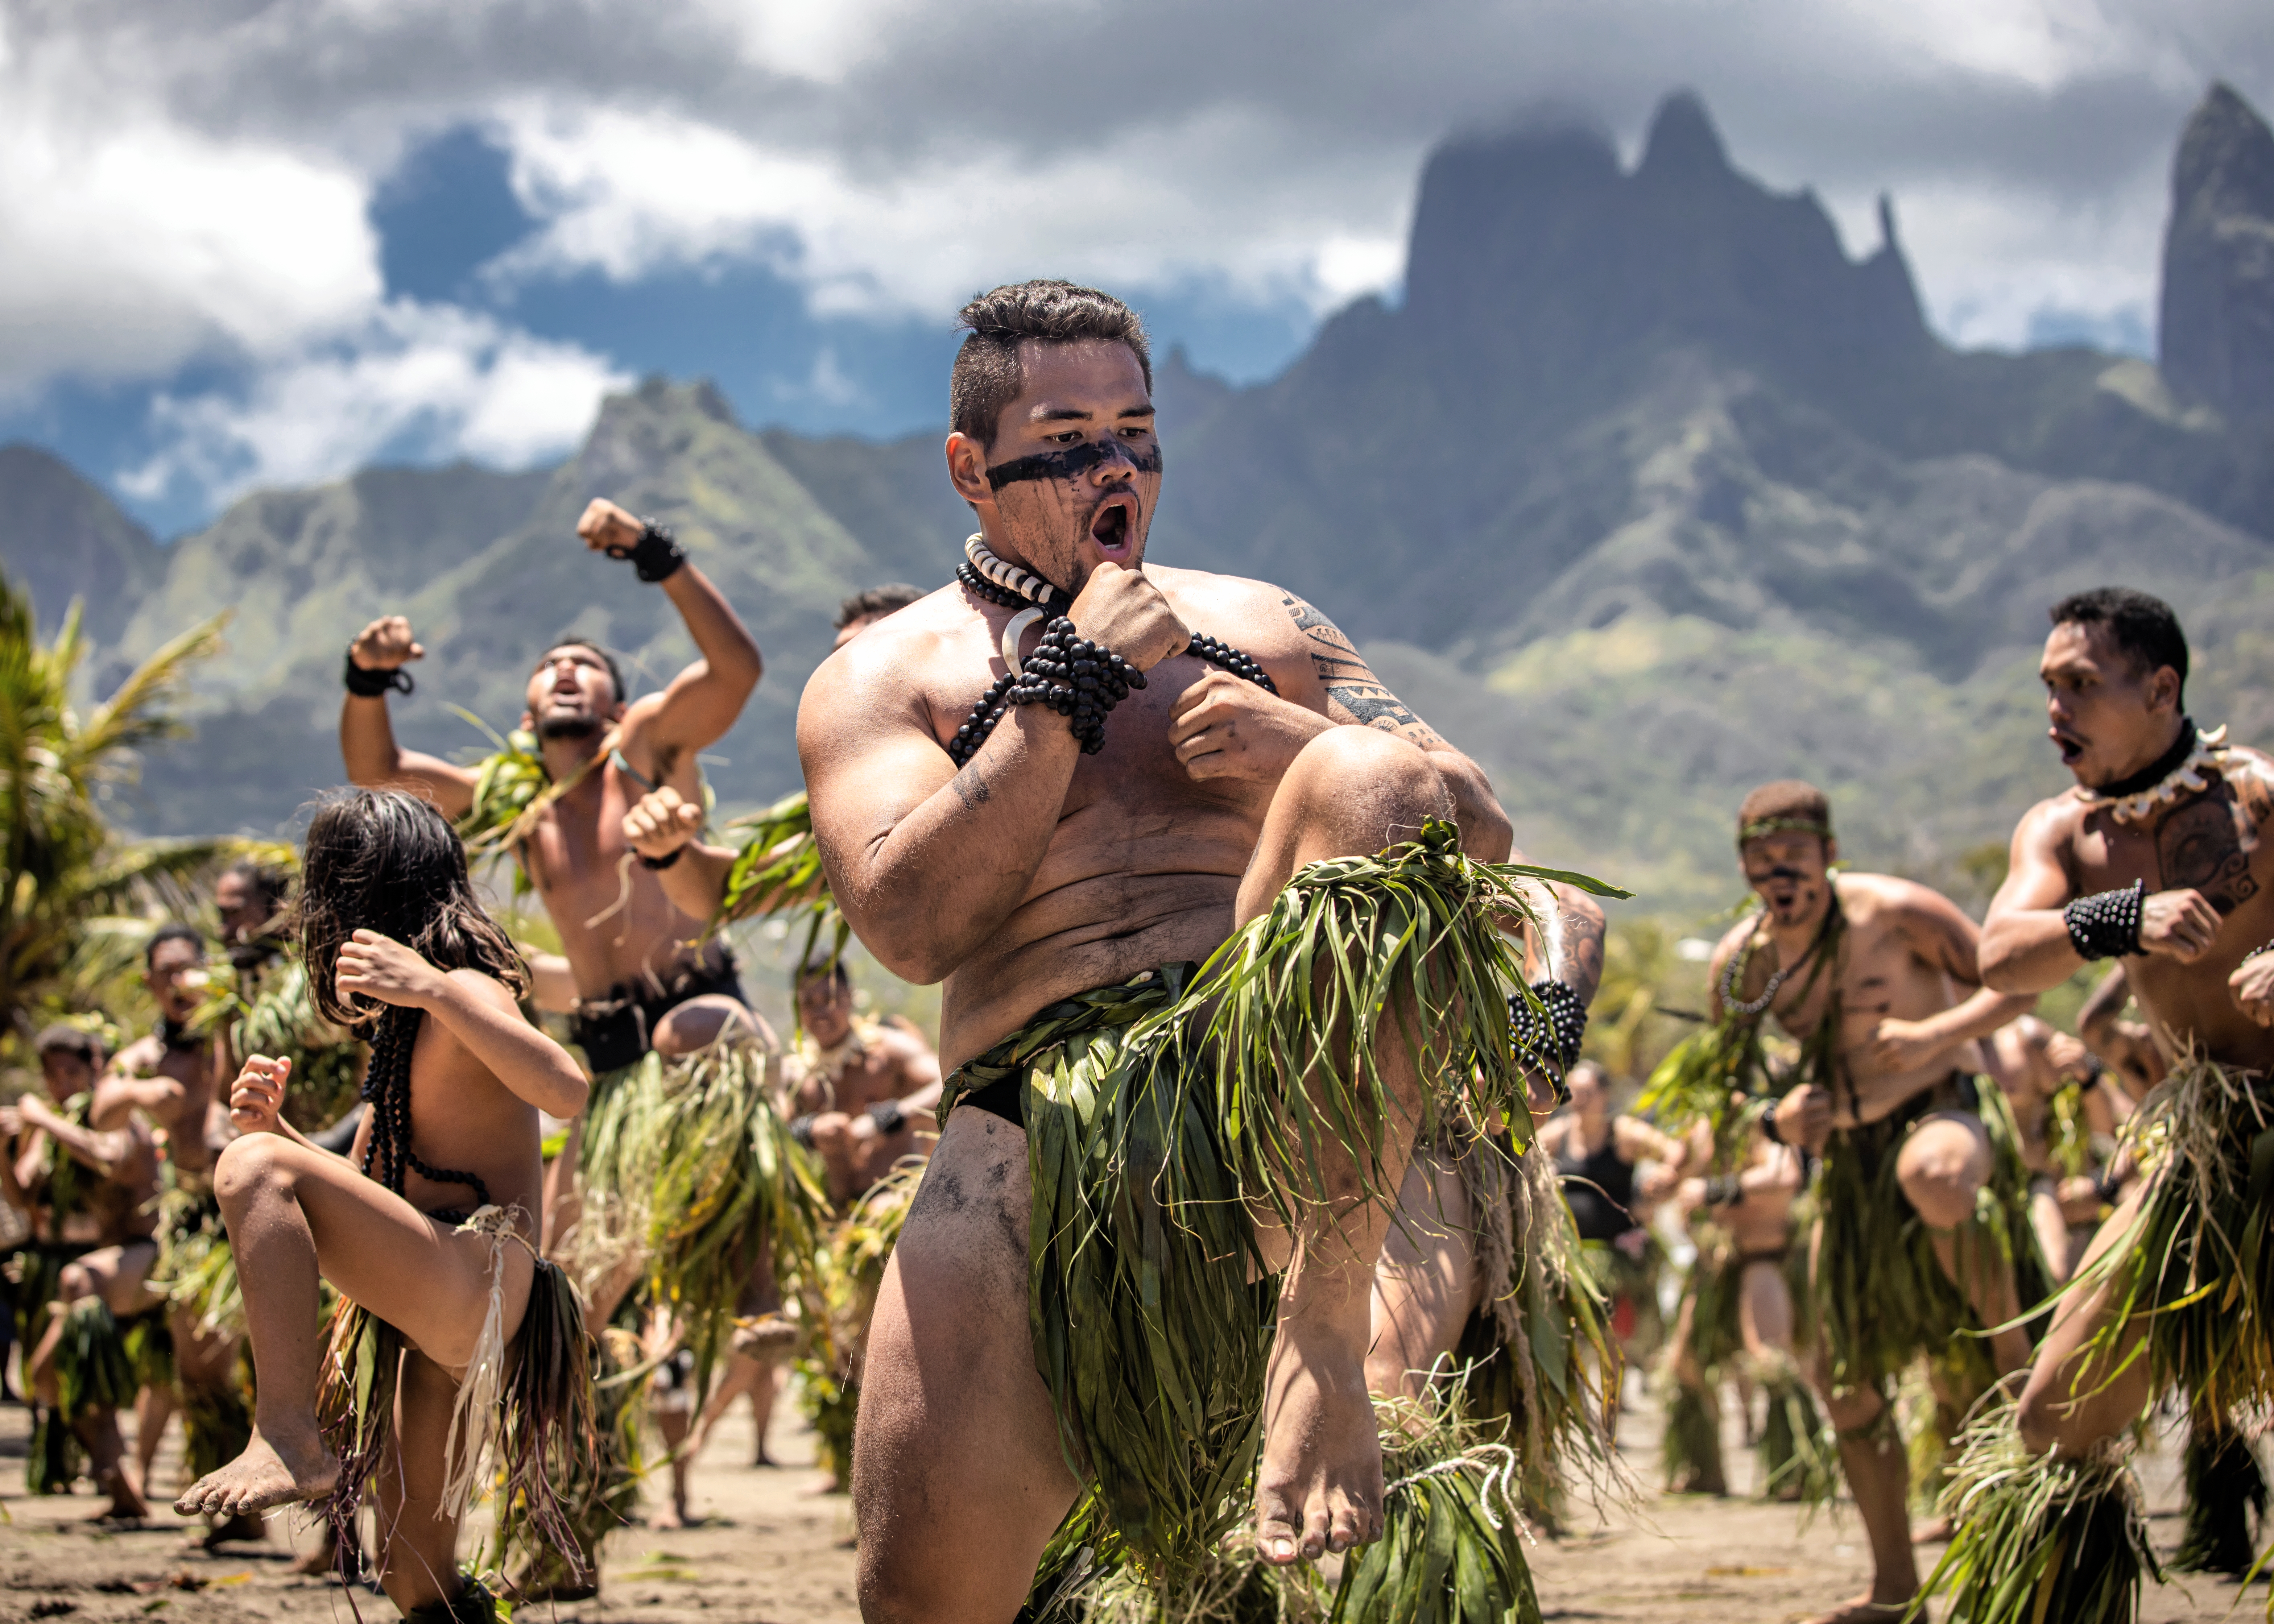 Dancers perform the haka during the Matavaa festival on the Marquesas Islands in French Polynesia